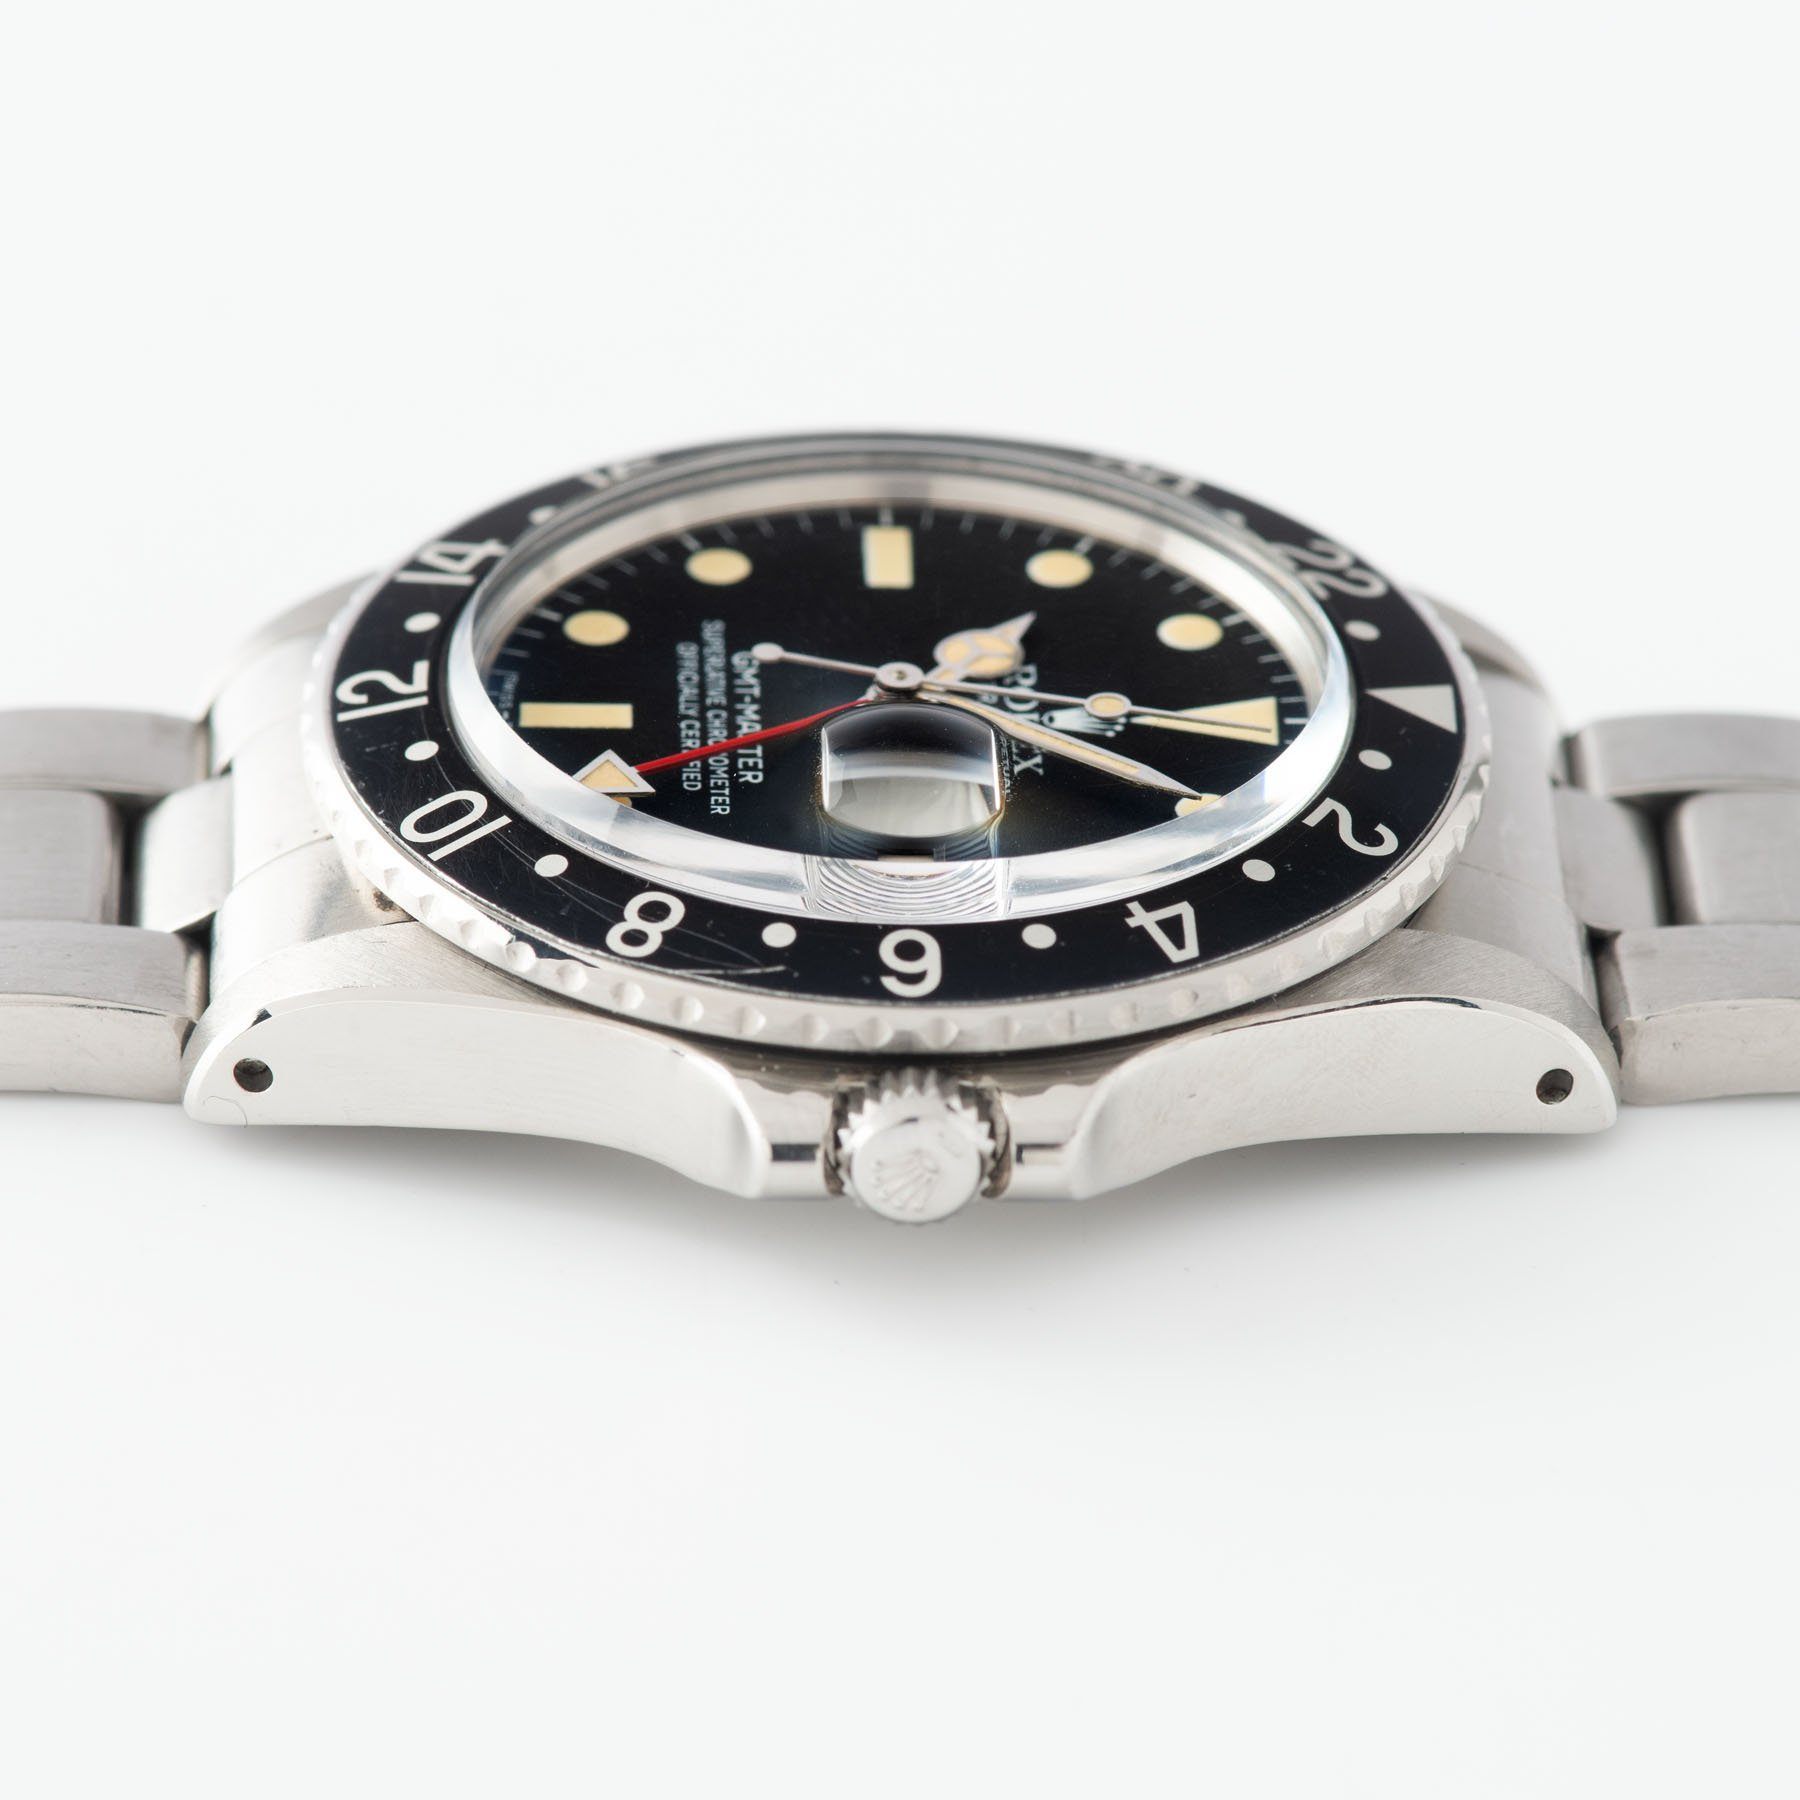 Rolex Gmt master 16750 matte dial with box & papers